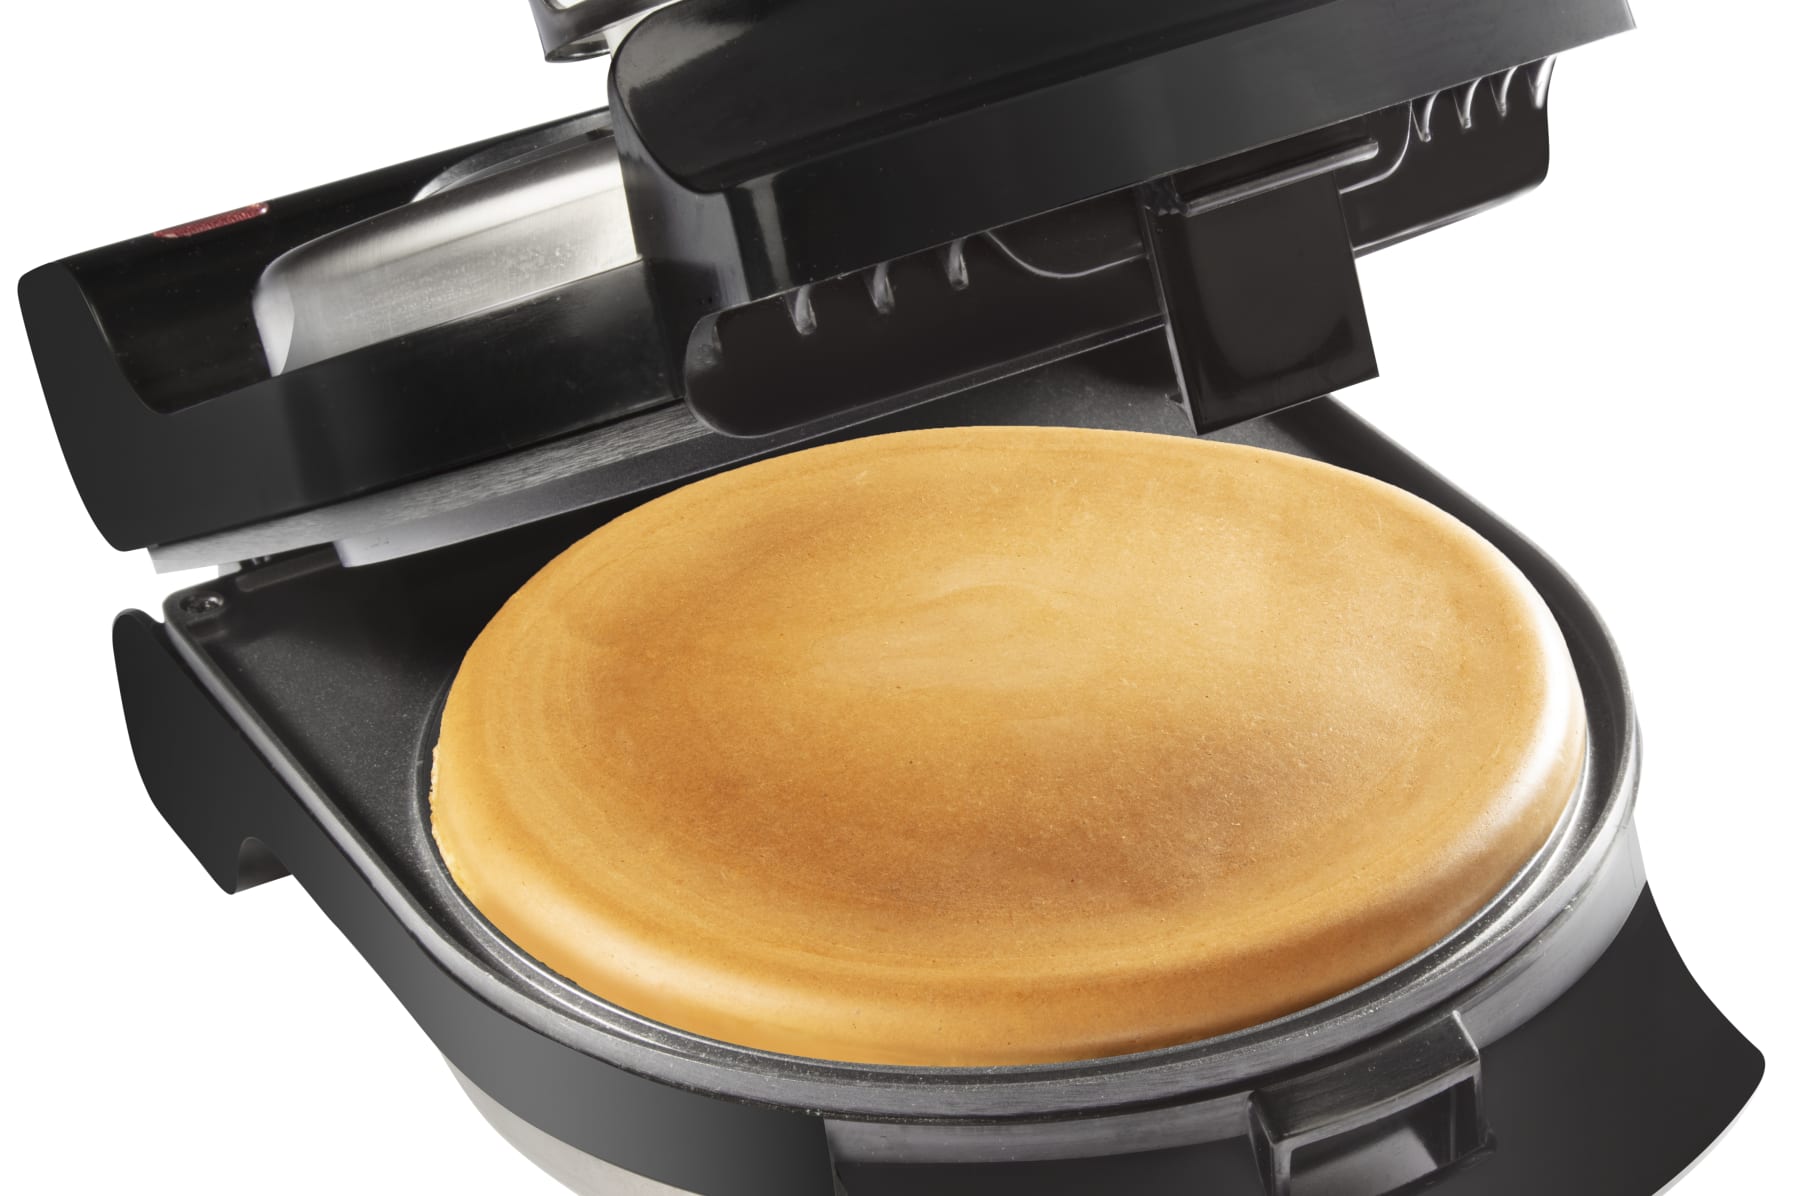 Stuffed Pancake Maker Is a Great Gift for Foodies and Breakfast Lovers